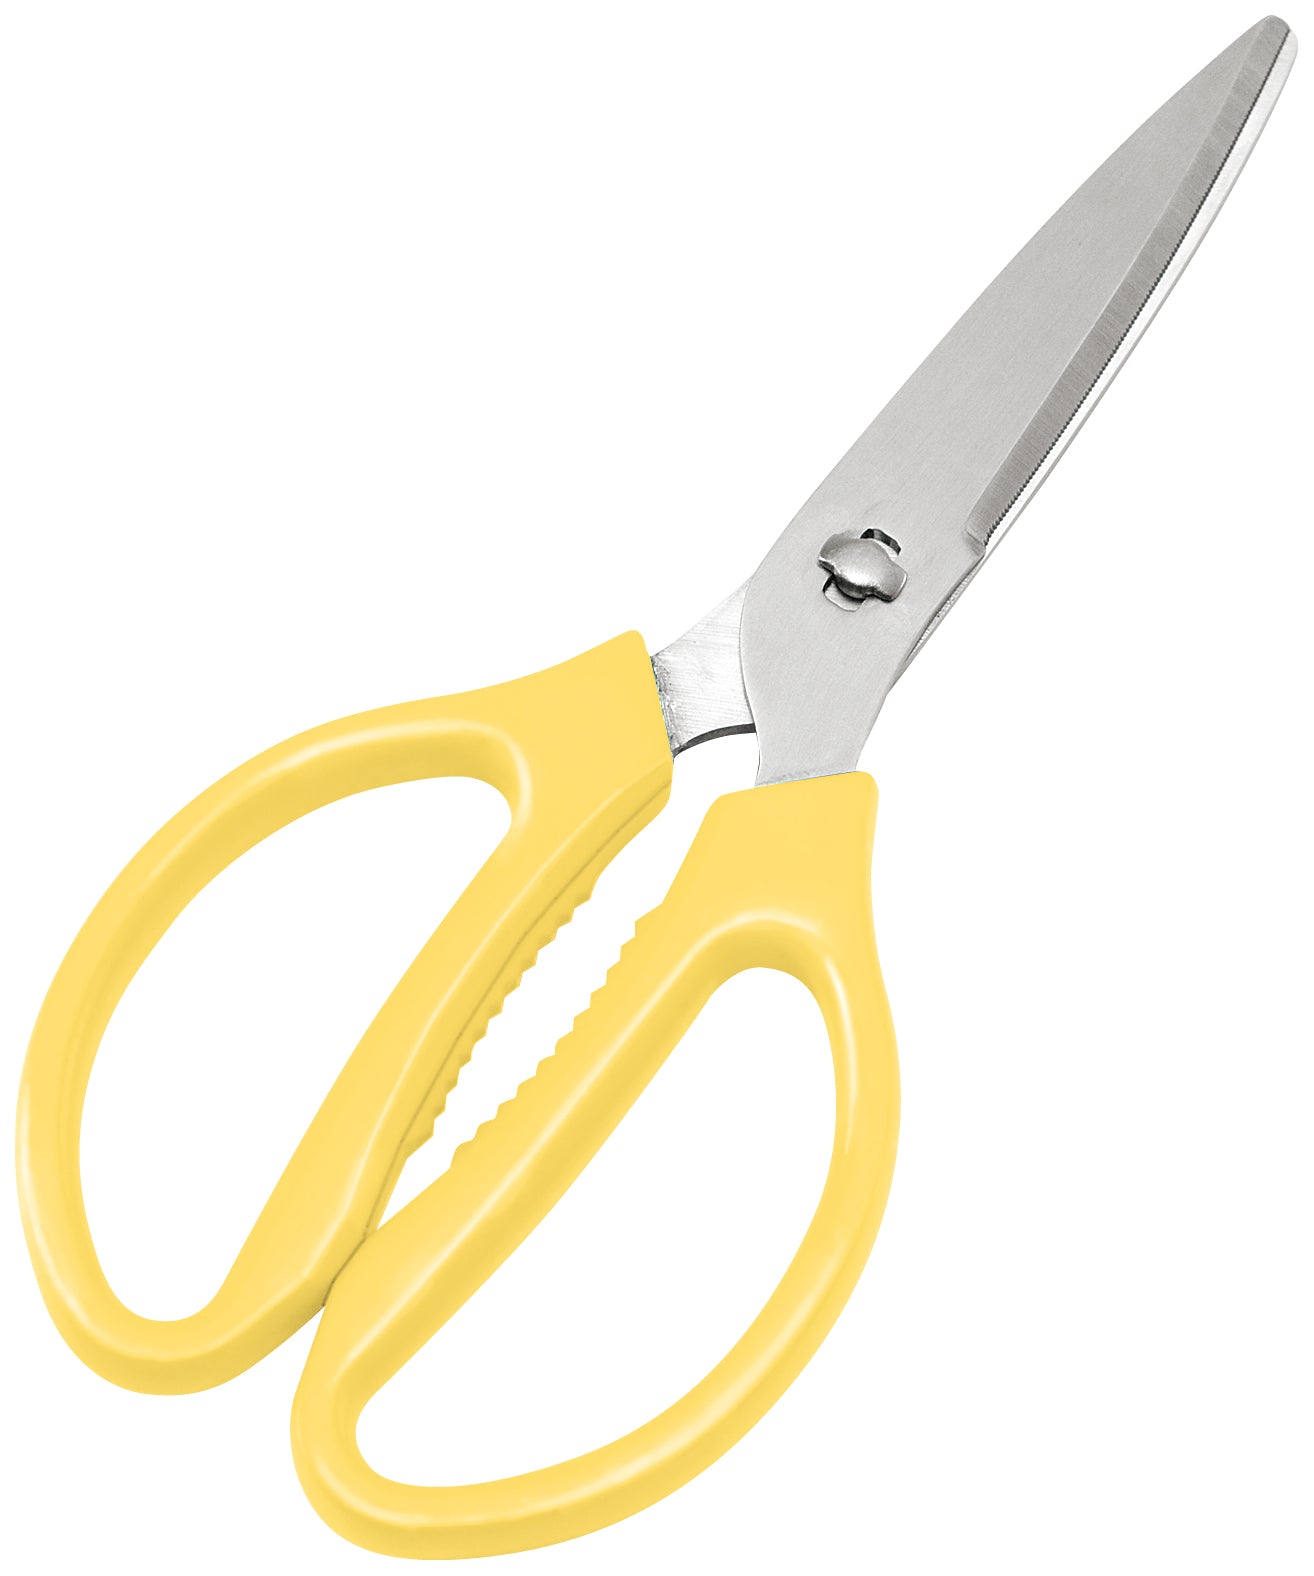 EBM Select Kitchen Stainless-Steel Scissors